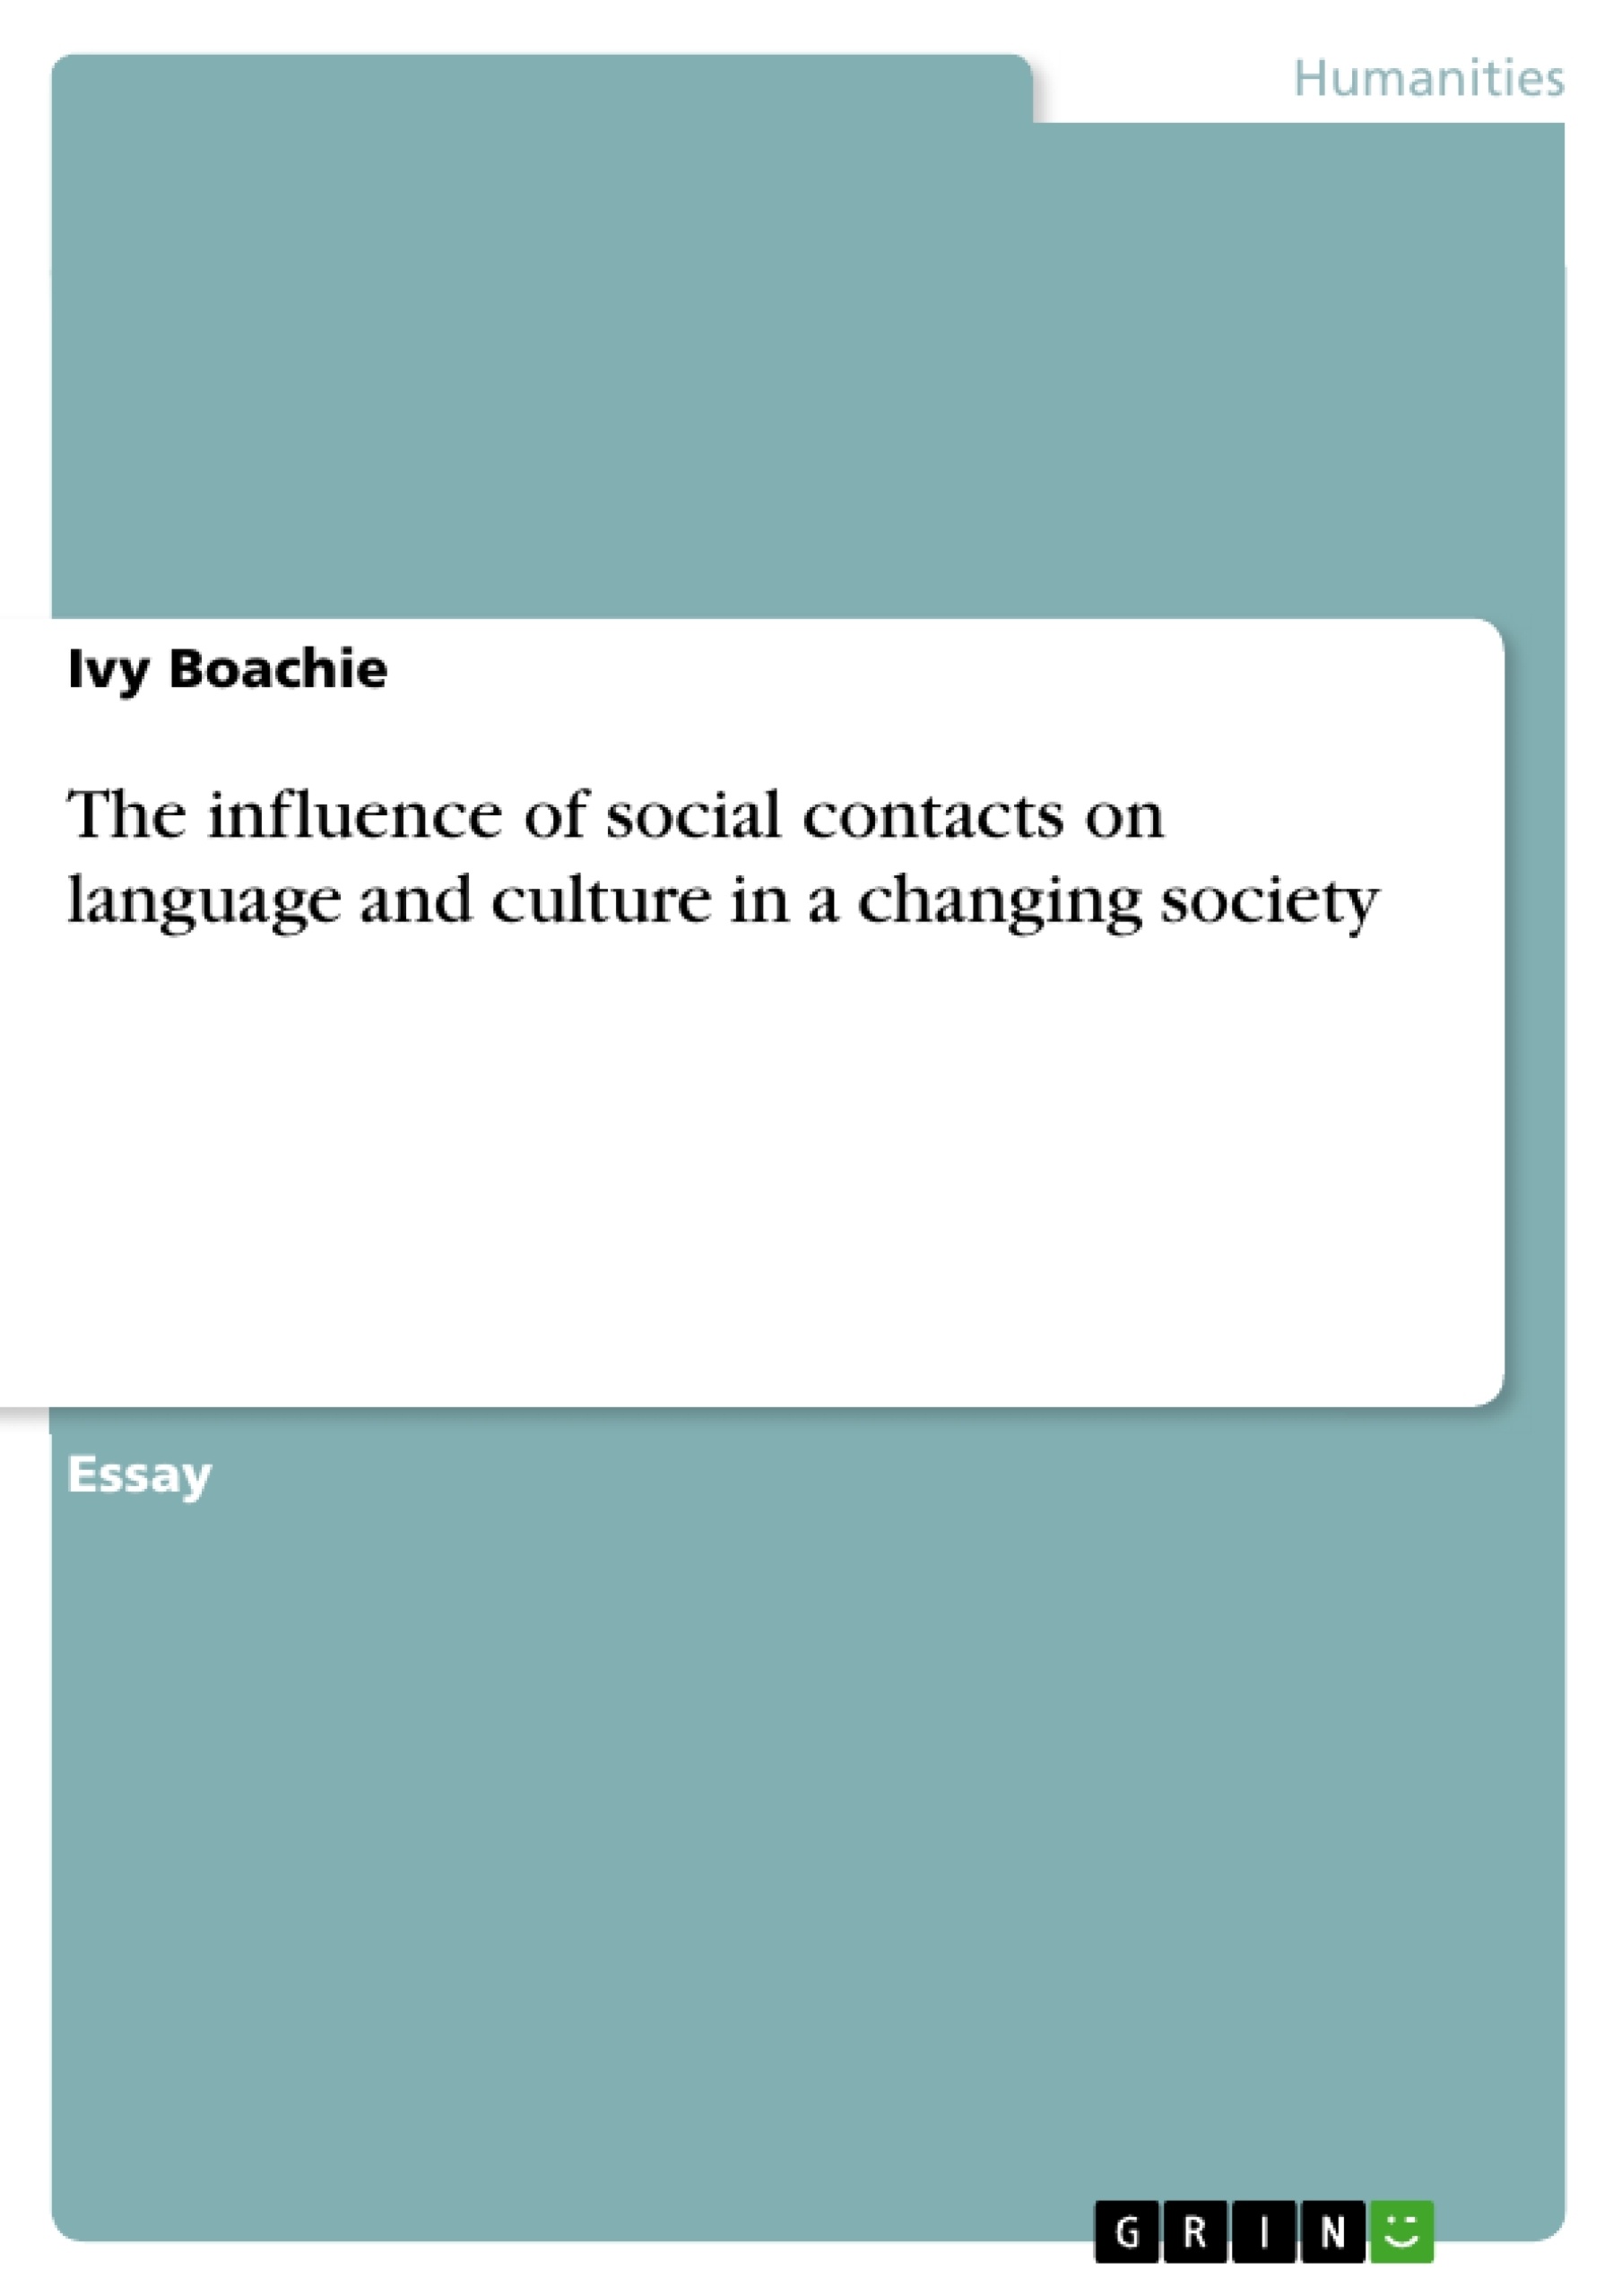 Title: The influence of social contacts on language and culture in a changing society